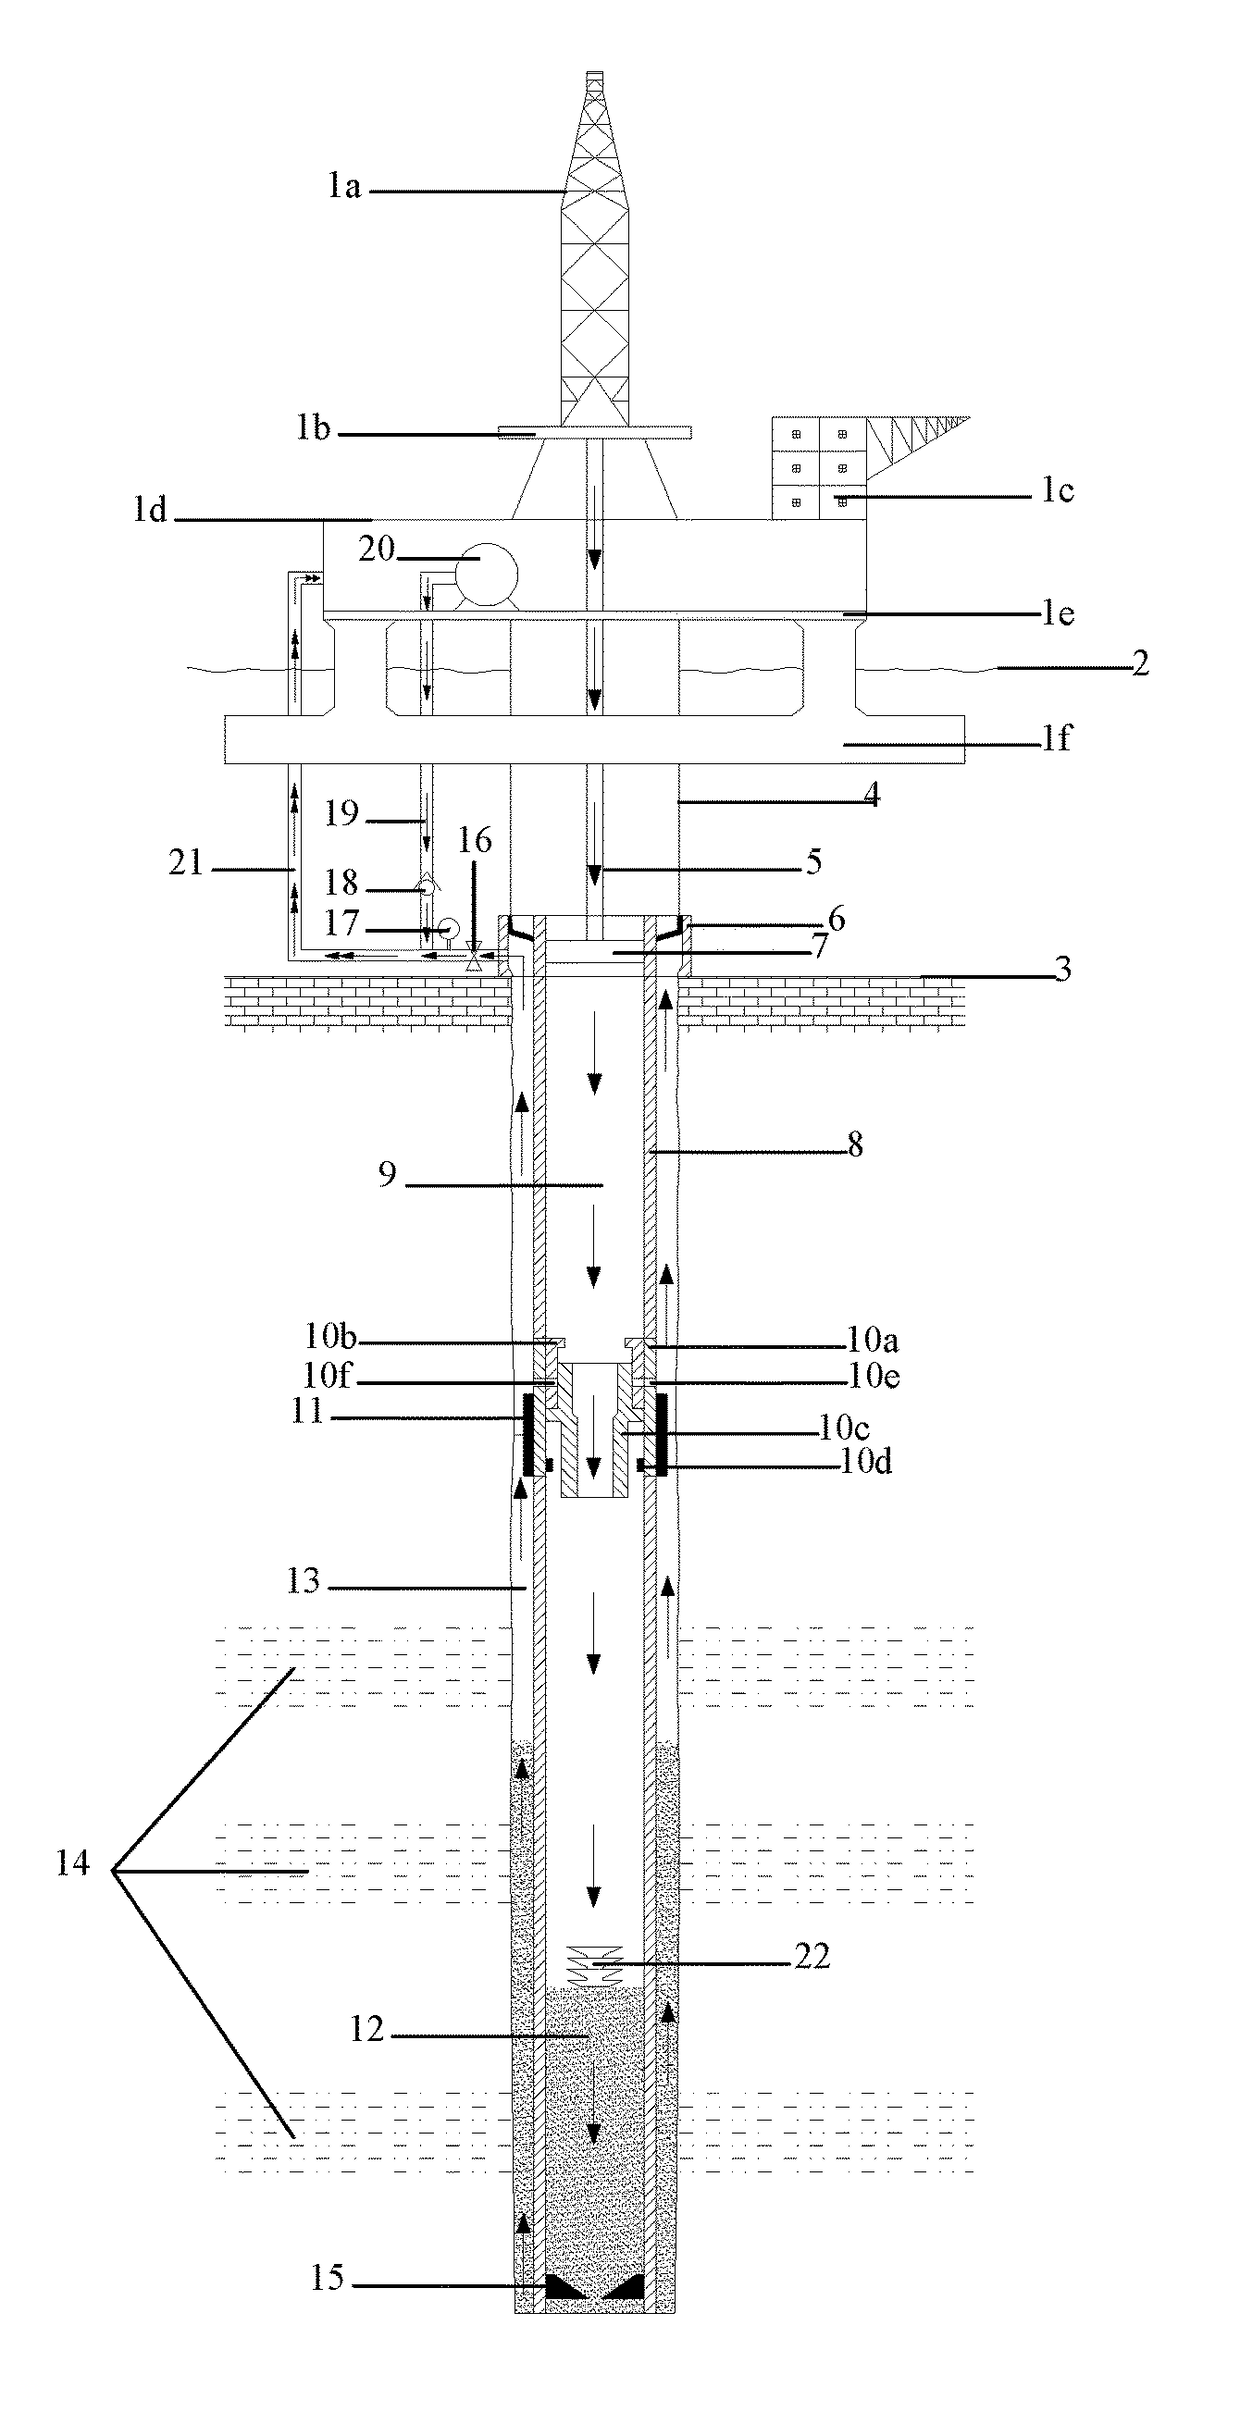 Wellbore pressure control system and method for offshore well cementation stages